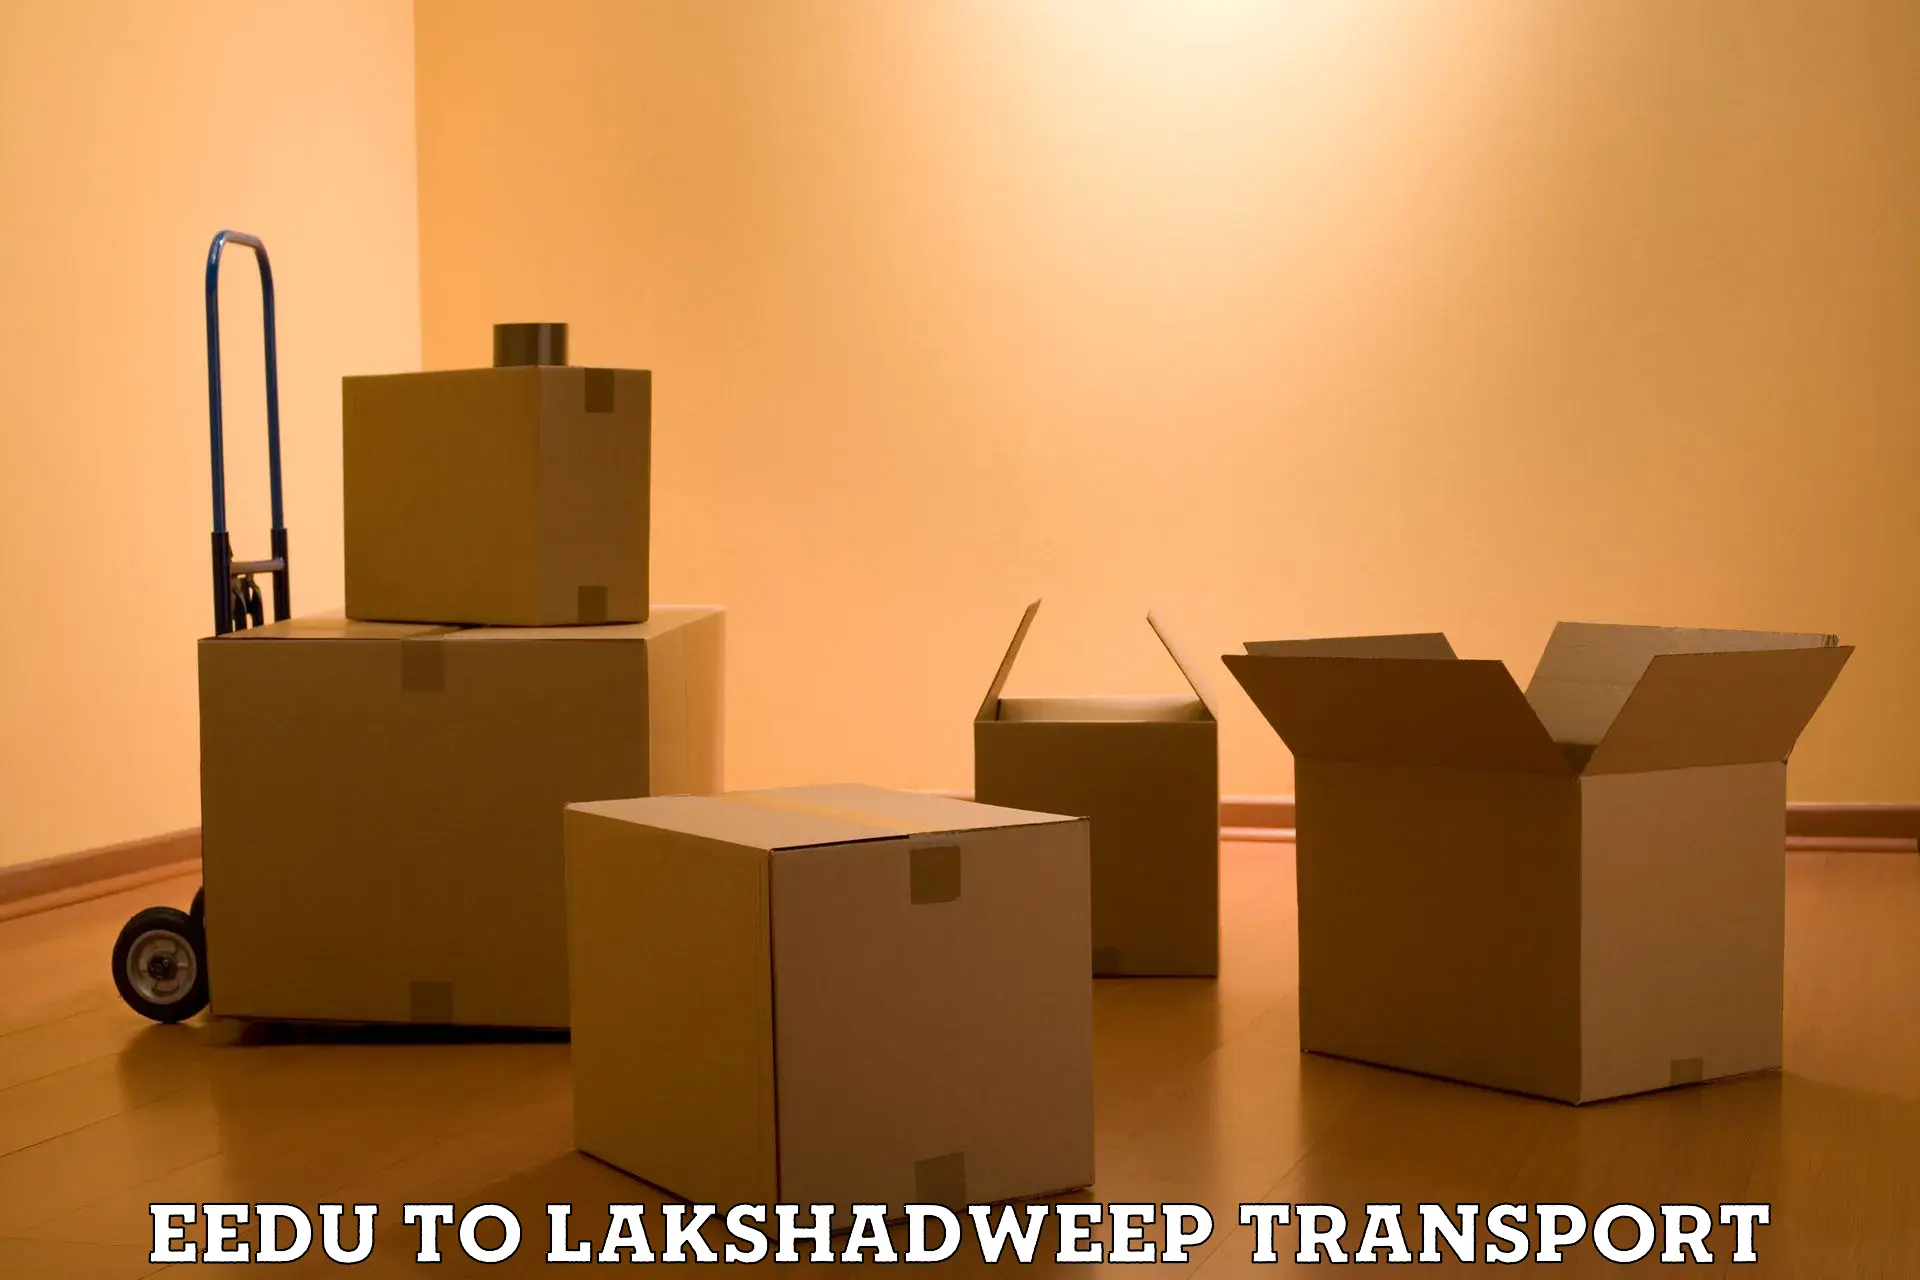 Container transport service Eedu to Lakshadweep